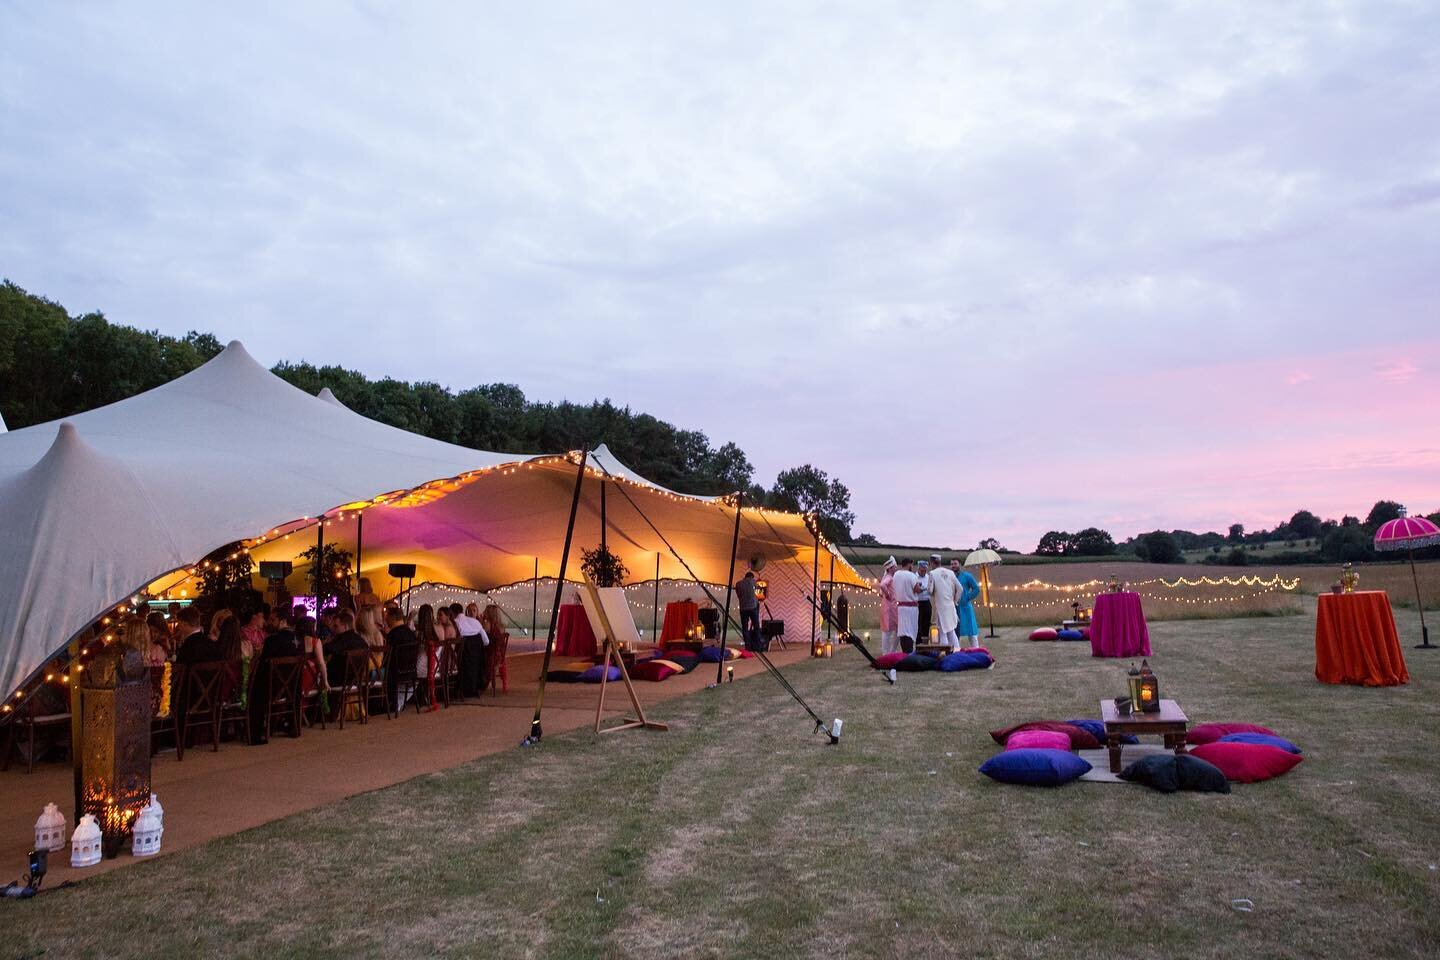 21st BIRTHDAY // Indian summer styled party in a Surrey field. The weather was so hot it was more like a field it Tuscany. Dreamy. 
/
/
/
/
/
#party #partyplanner #21stbirthday #privateparty #surrey #surreyhills